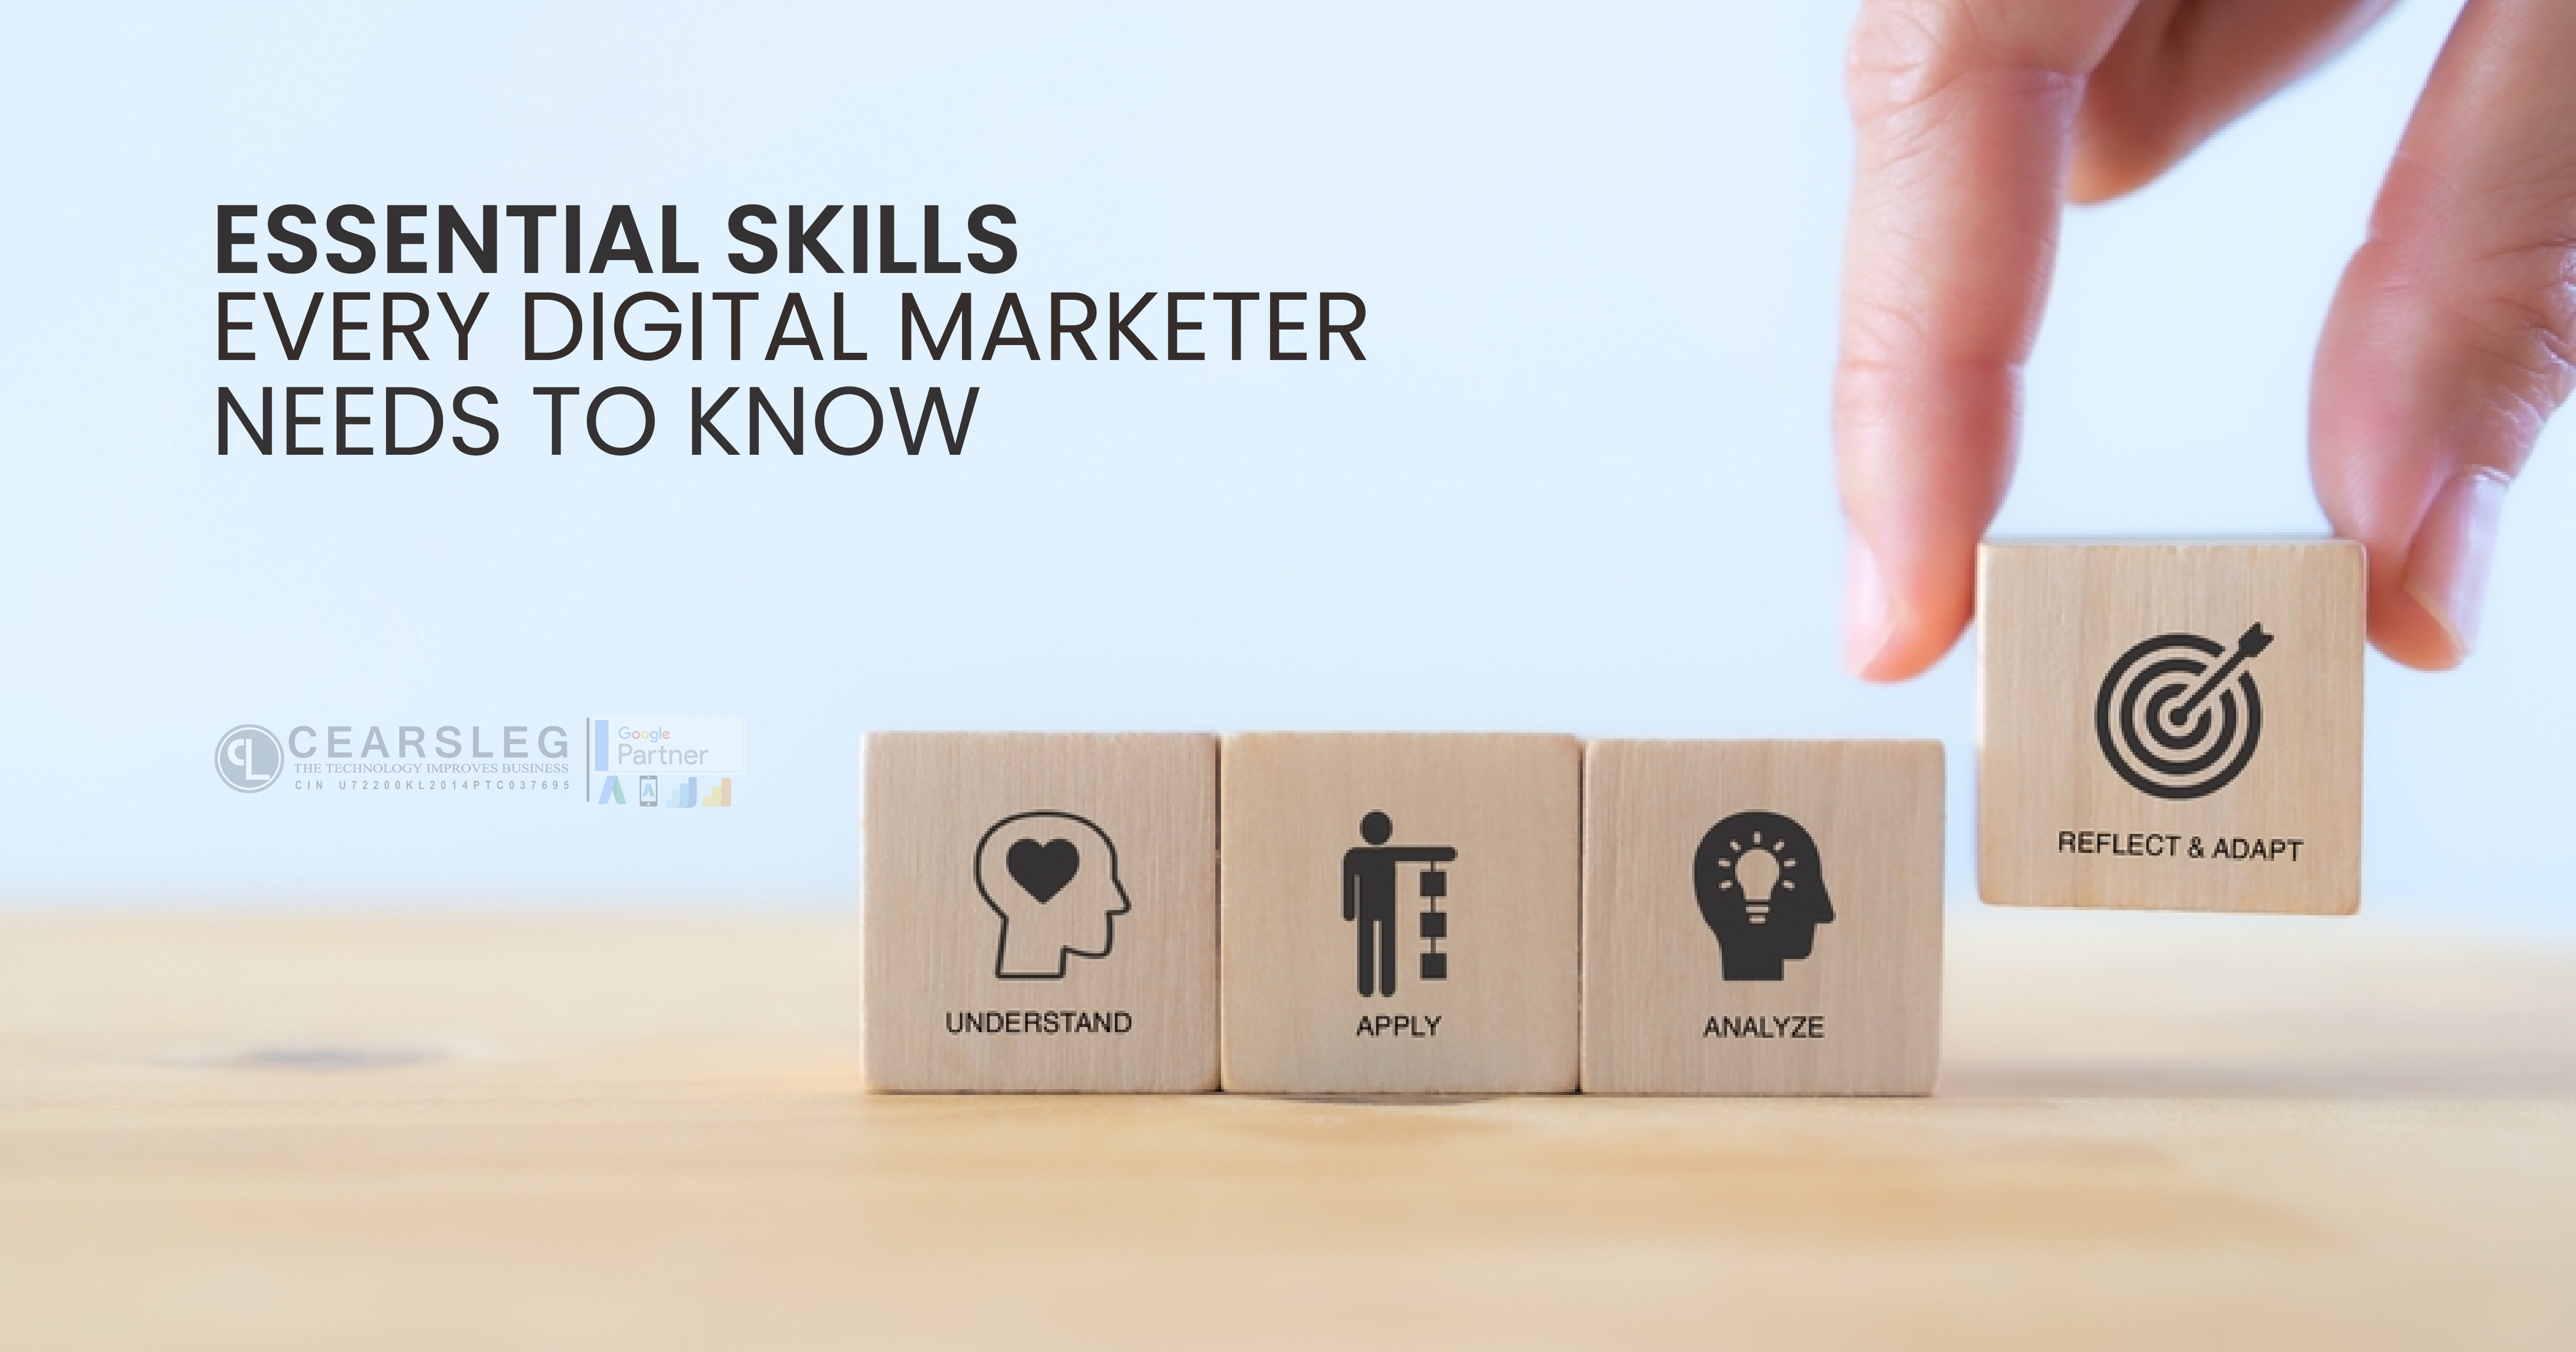 10 Essential Skills Every Digital Marketer Needs to Know